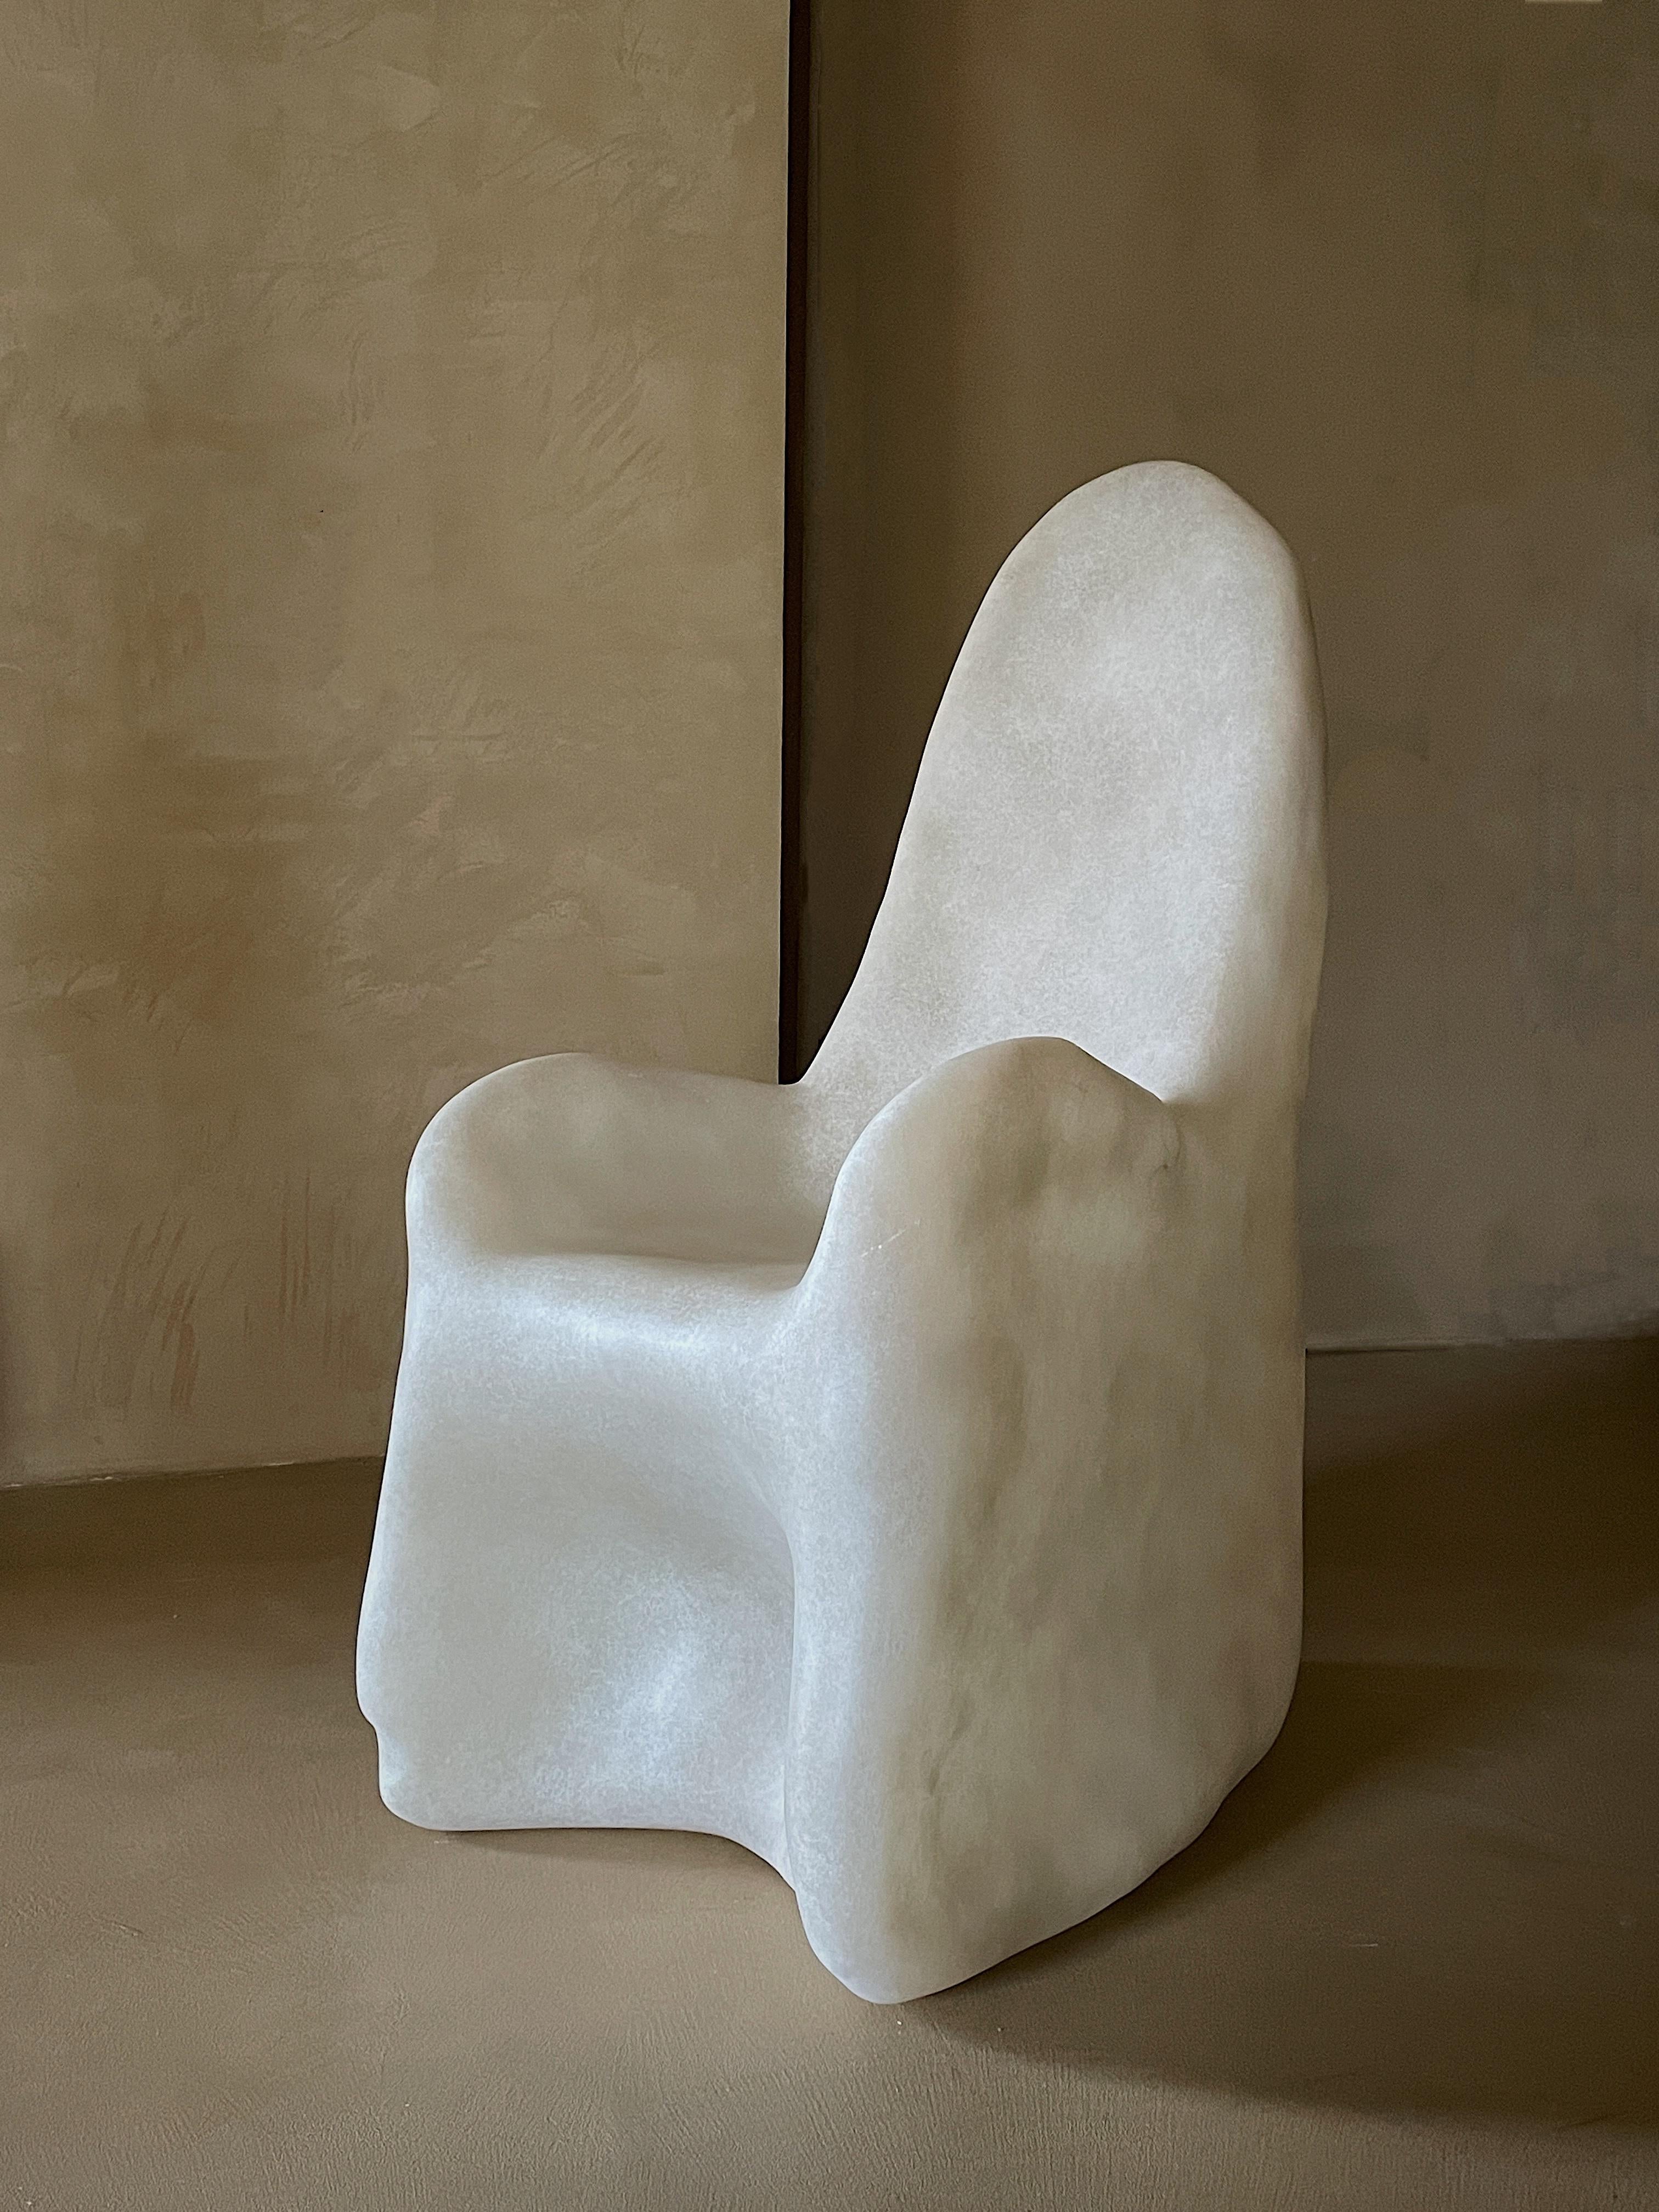 Knead armchair by Karstudio
Dimensions: W 75 x D 55 x H 110 cm
Materials: FRP
Available in black

Kar, is the root of Sanskrit Karma, meaning karmic repetition. We seek the cause and effect in aesthetics, inspired from the past, the present, and the